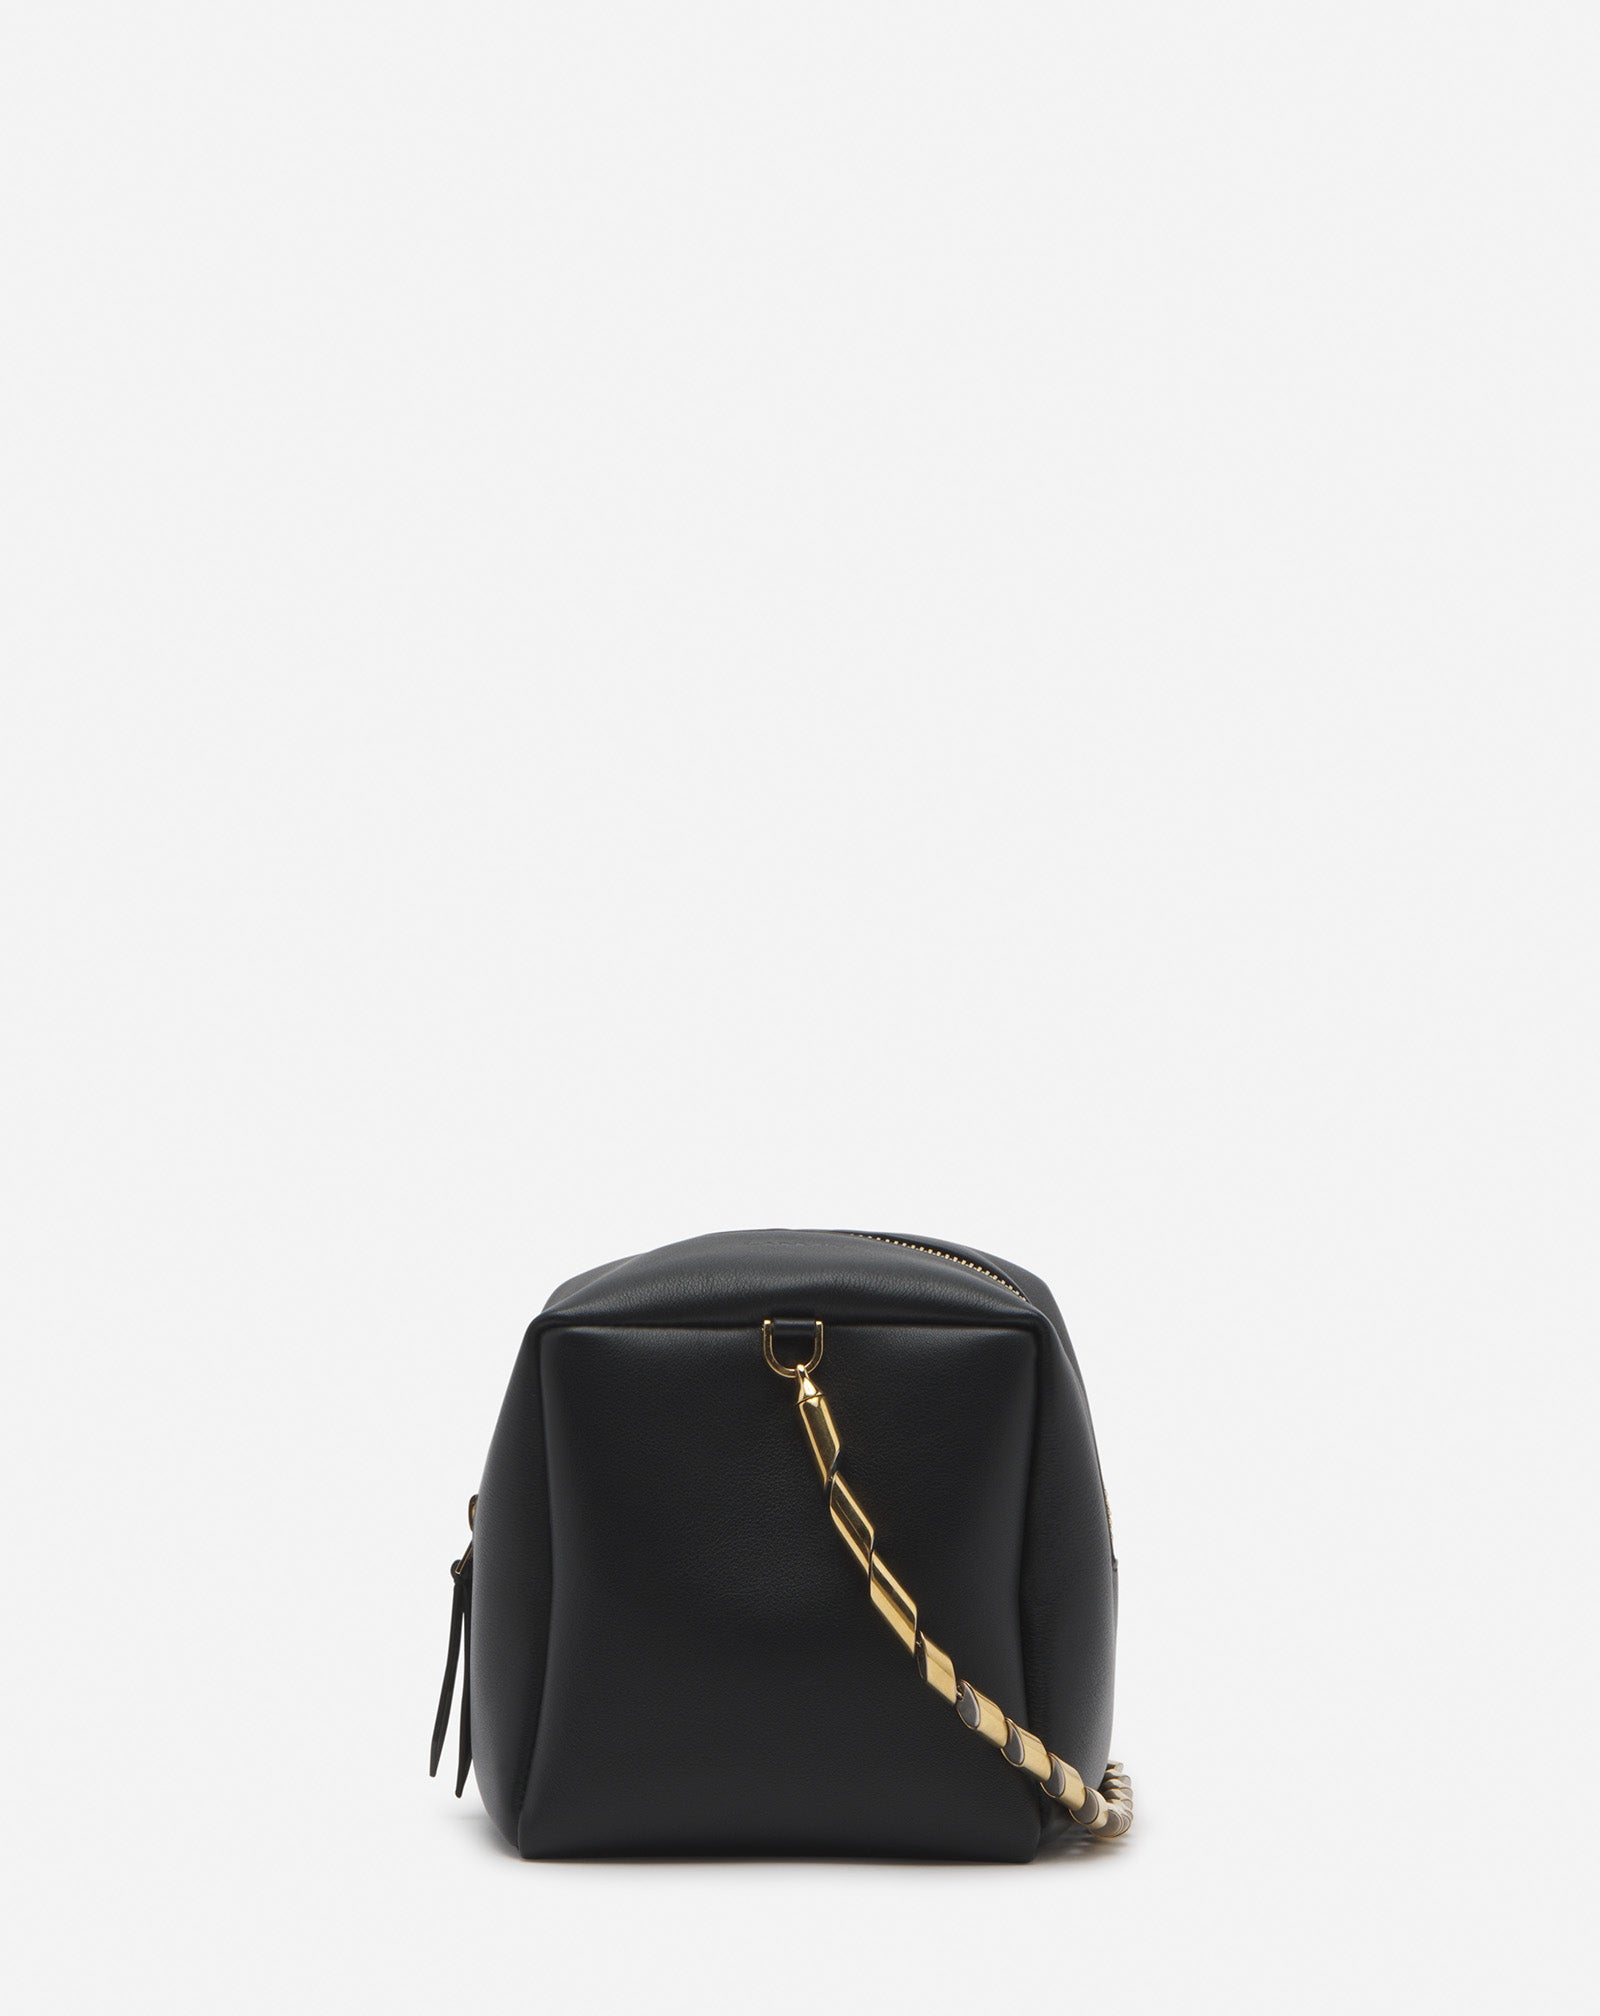  TEMPO BY LANVIN LEATHER BAG WITH SEQUENCE BY LANVIN CHAIN, BLACK